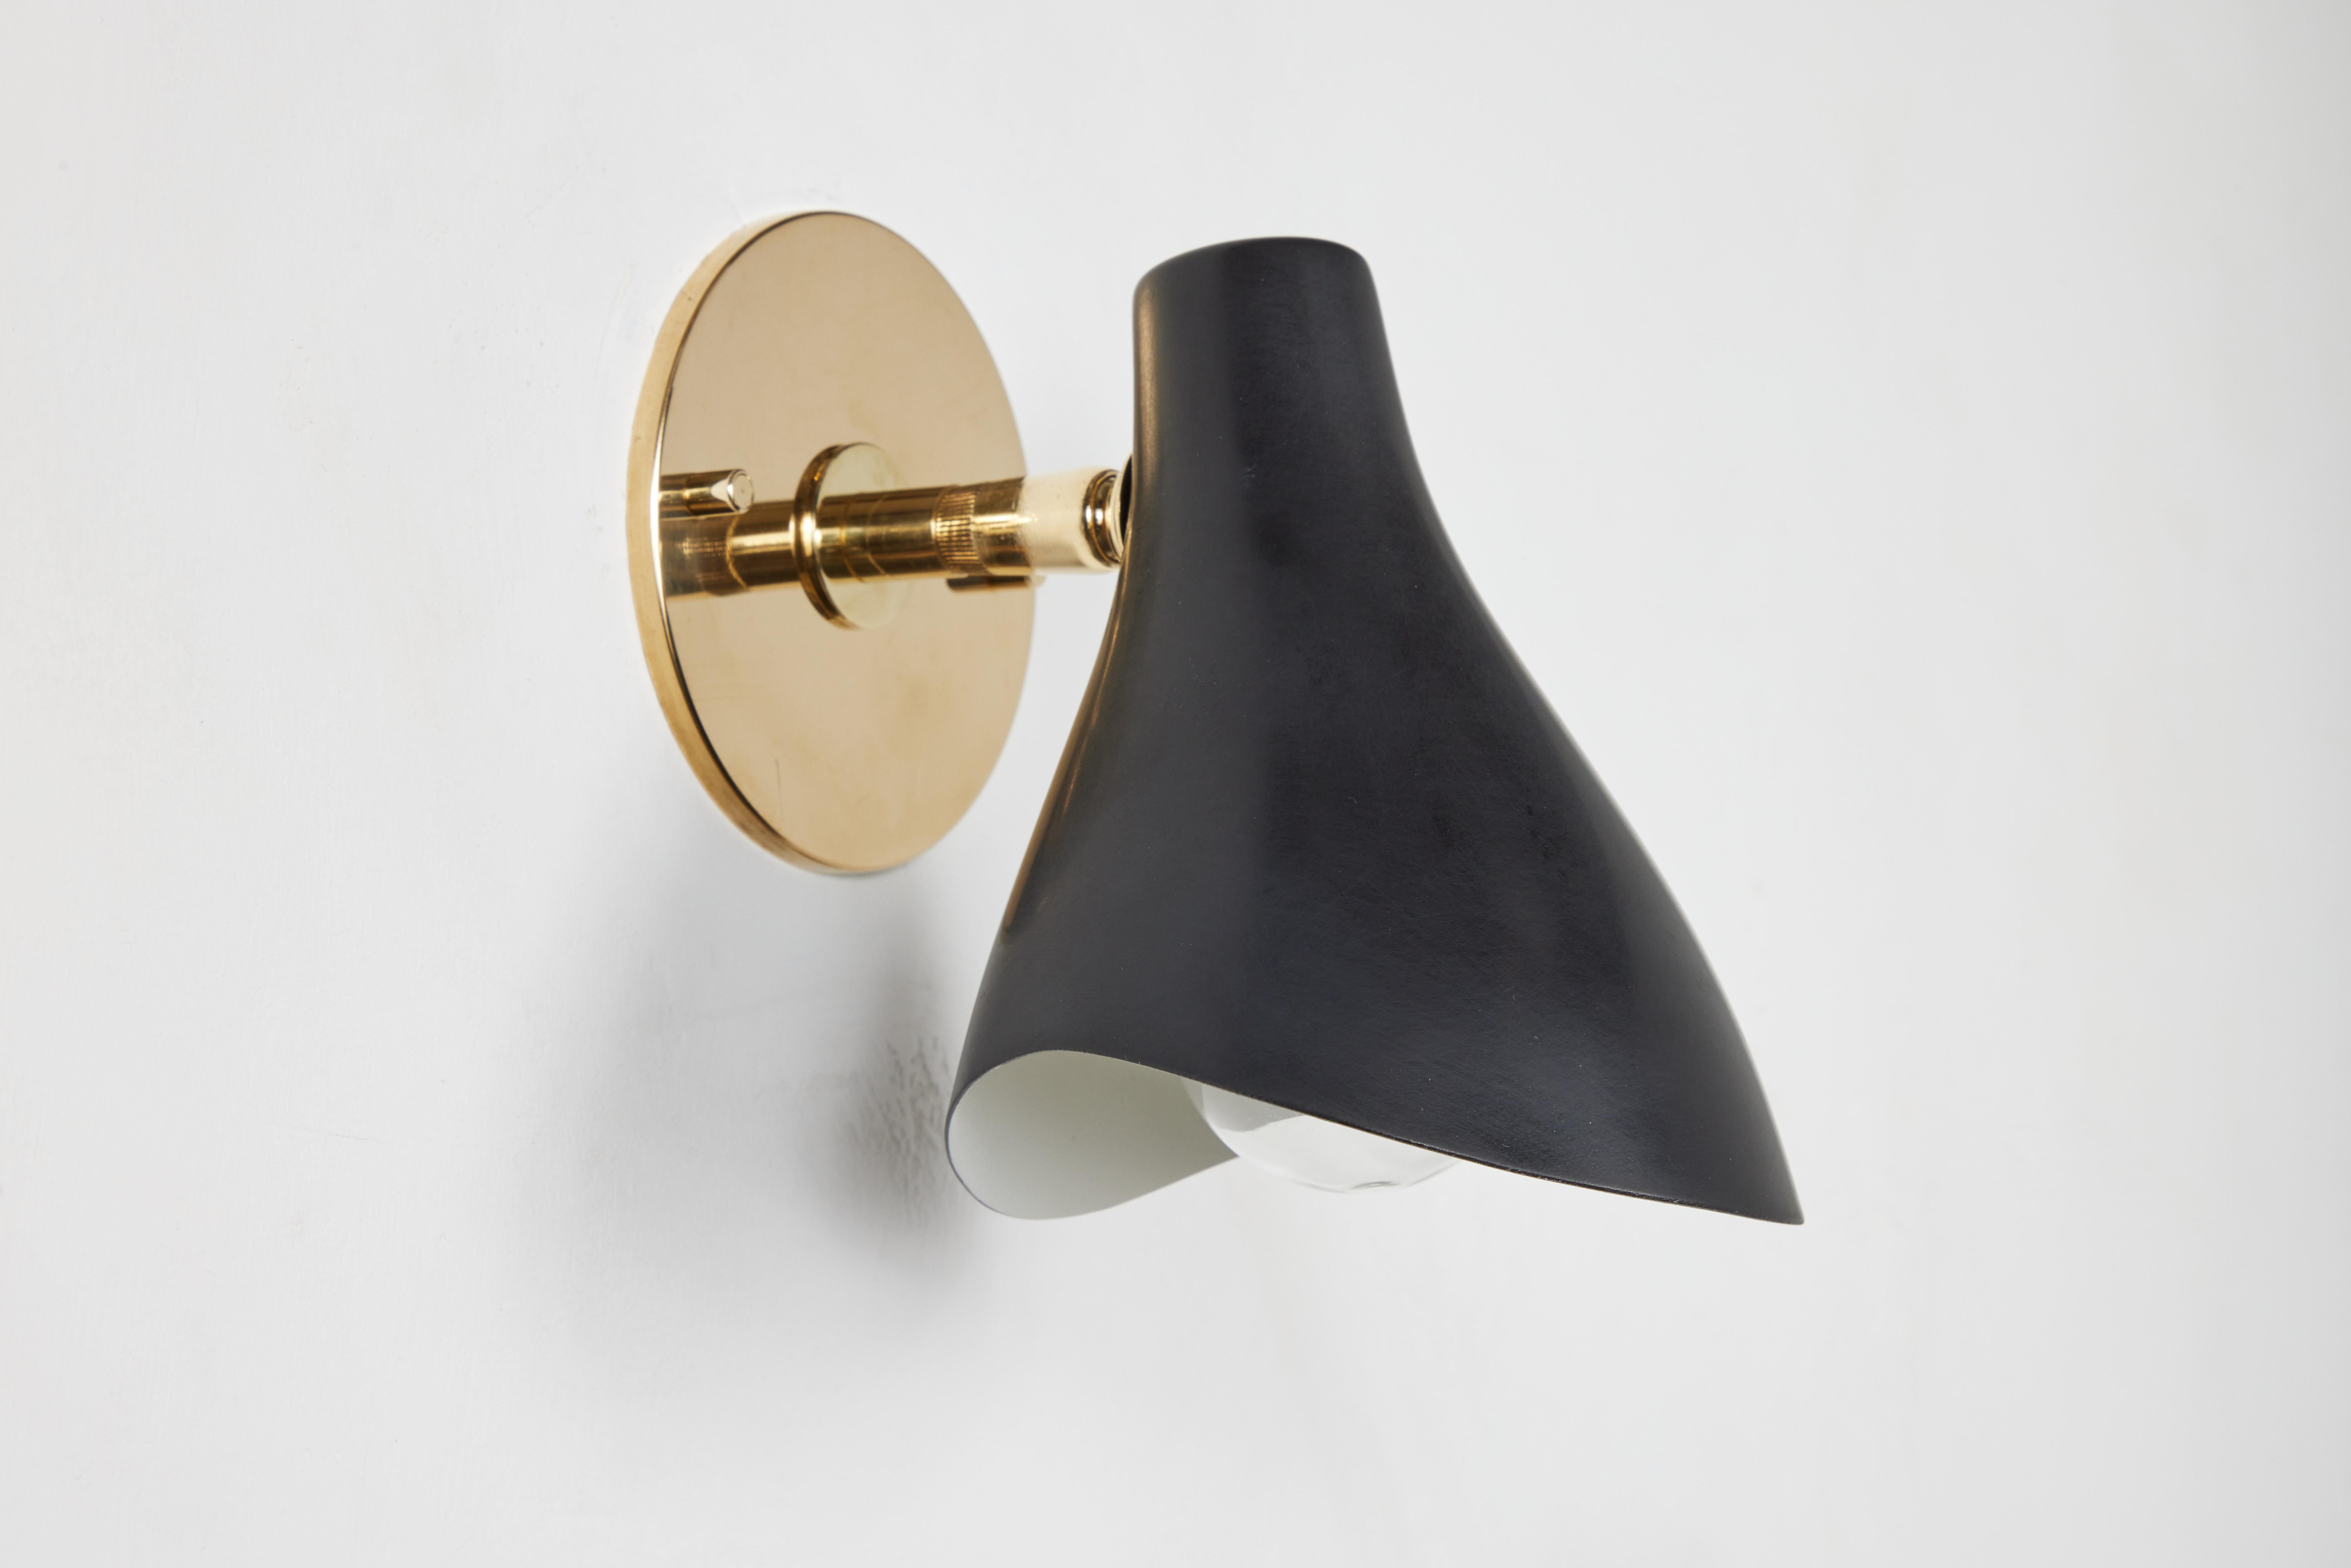 Pair of Gino Sarfatti Model #10 Sconces in Black for Arteluce For Sale 9